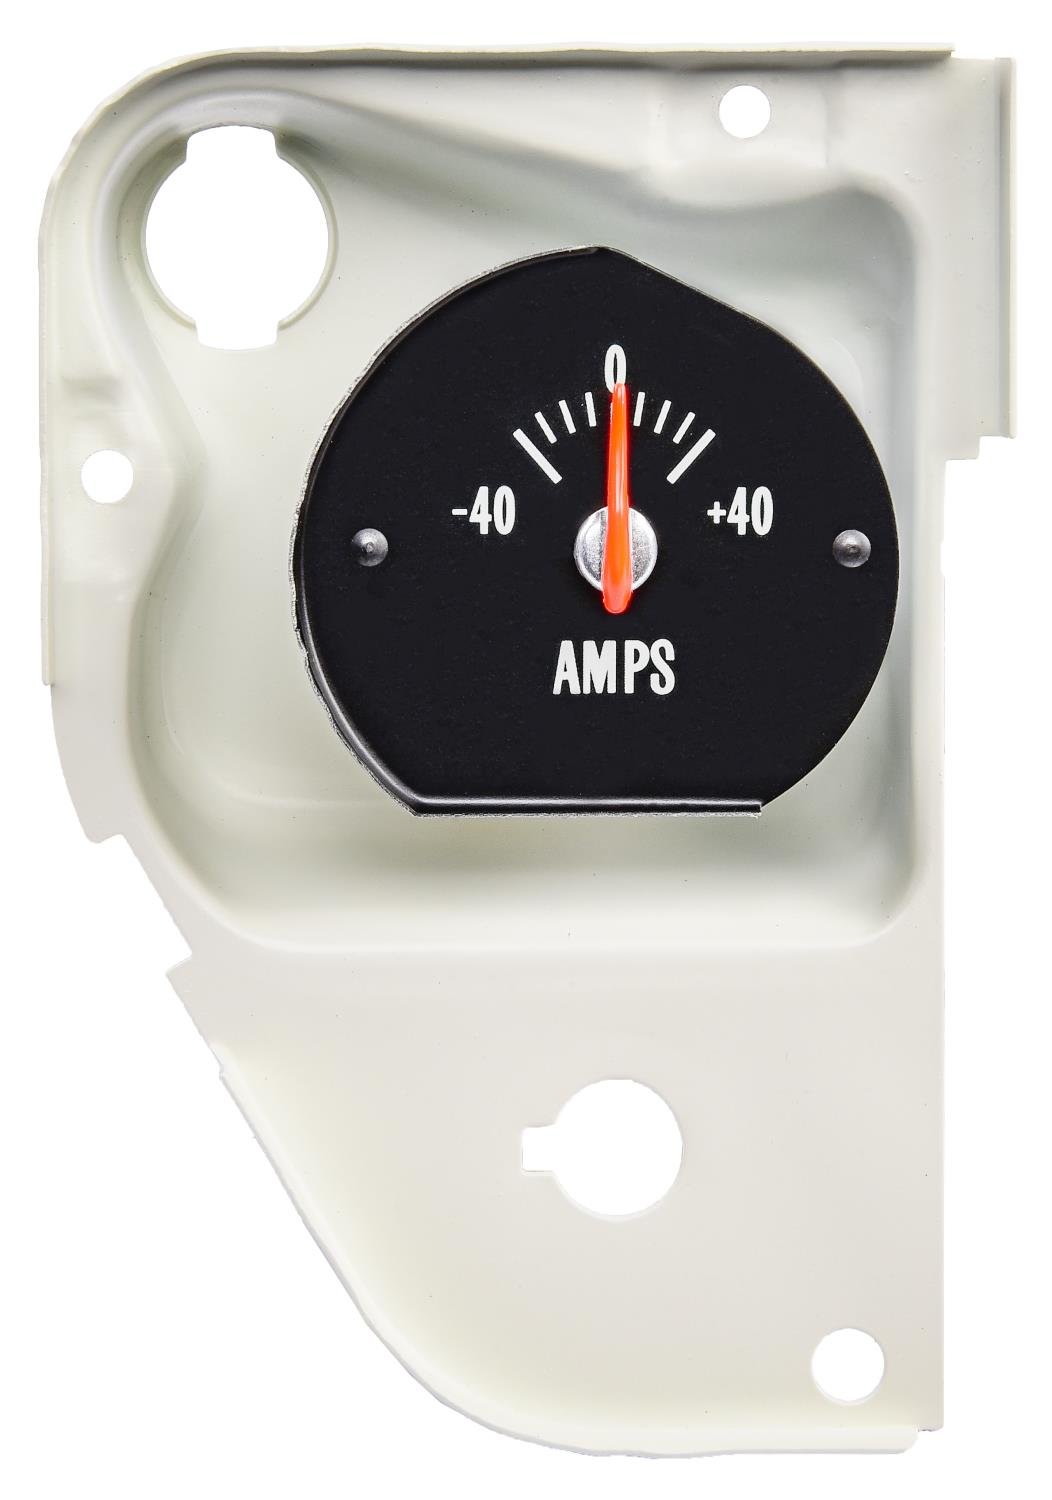 Factory Style Amp Gauge for 1971-1972 Chevrolet Chevelle, El Camino and Monte Carlo